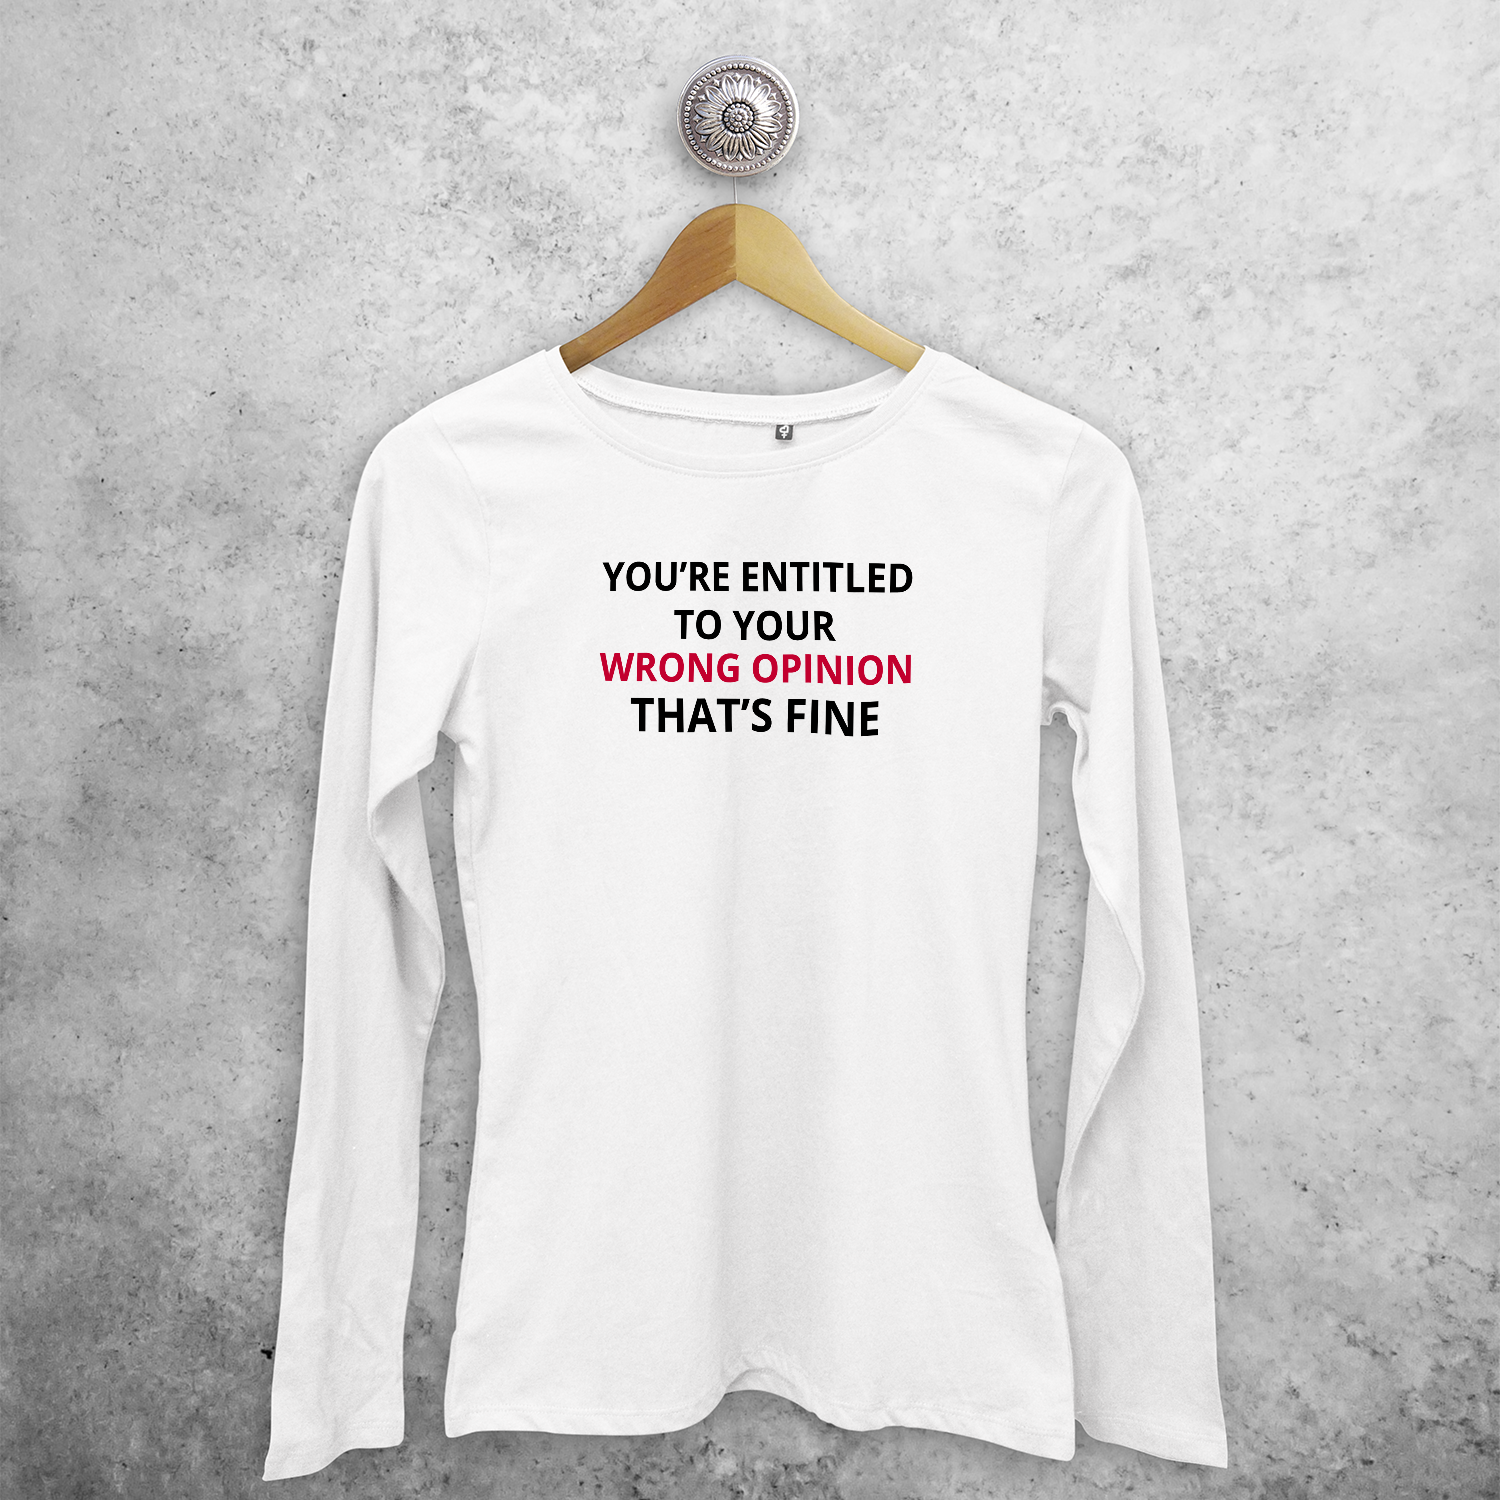 'You're entitled to your wrong opinion - That's fine' adult longsleeve shirt